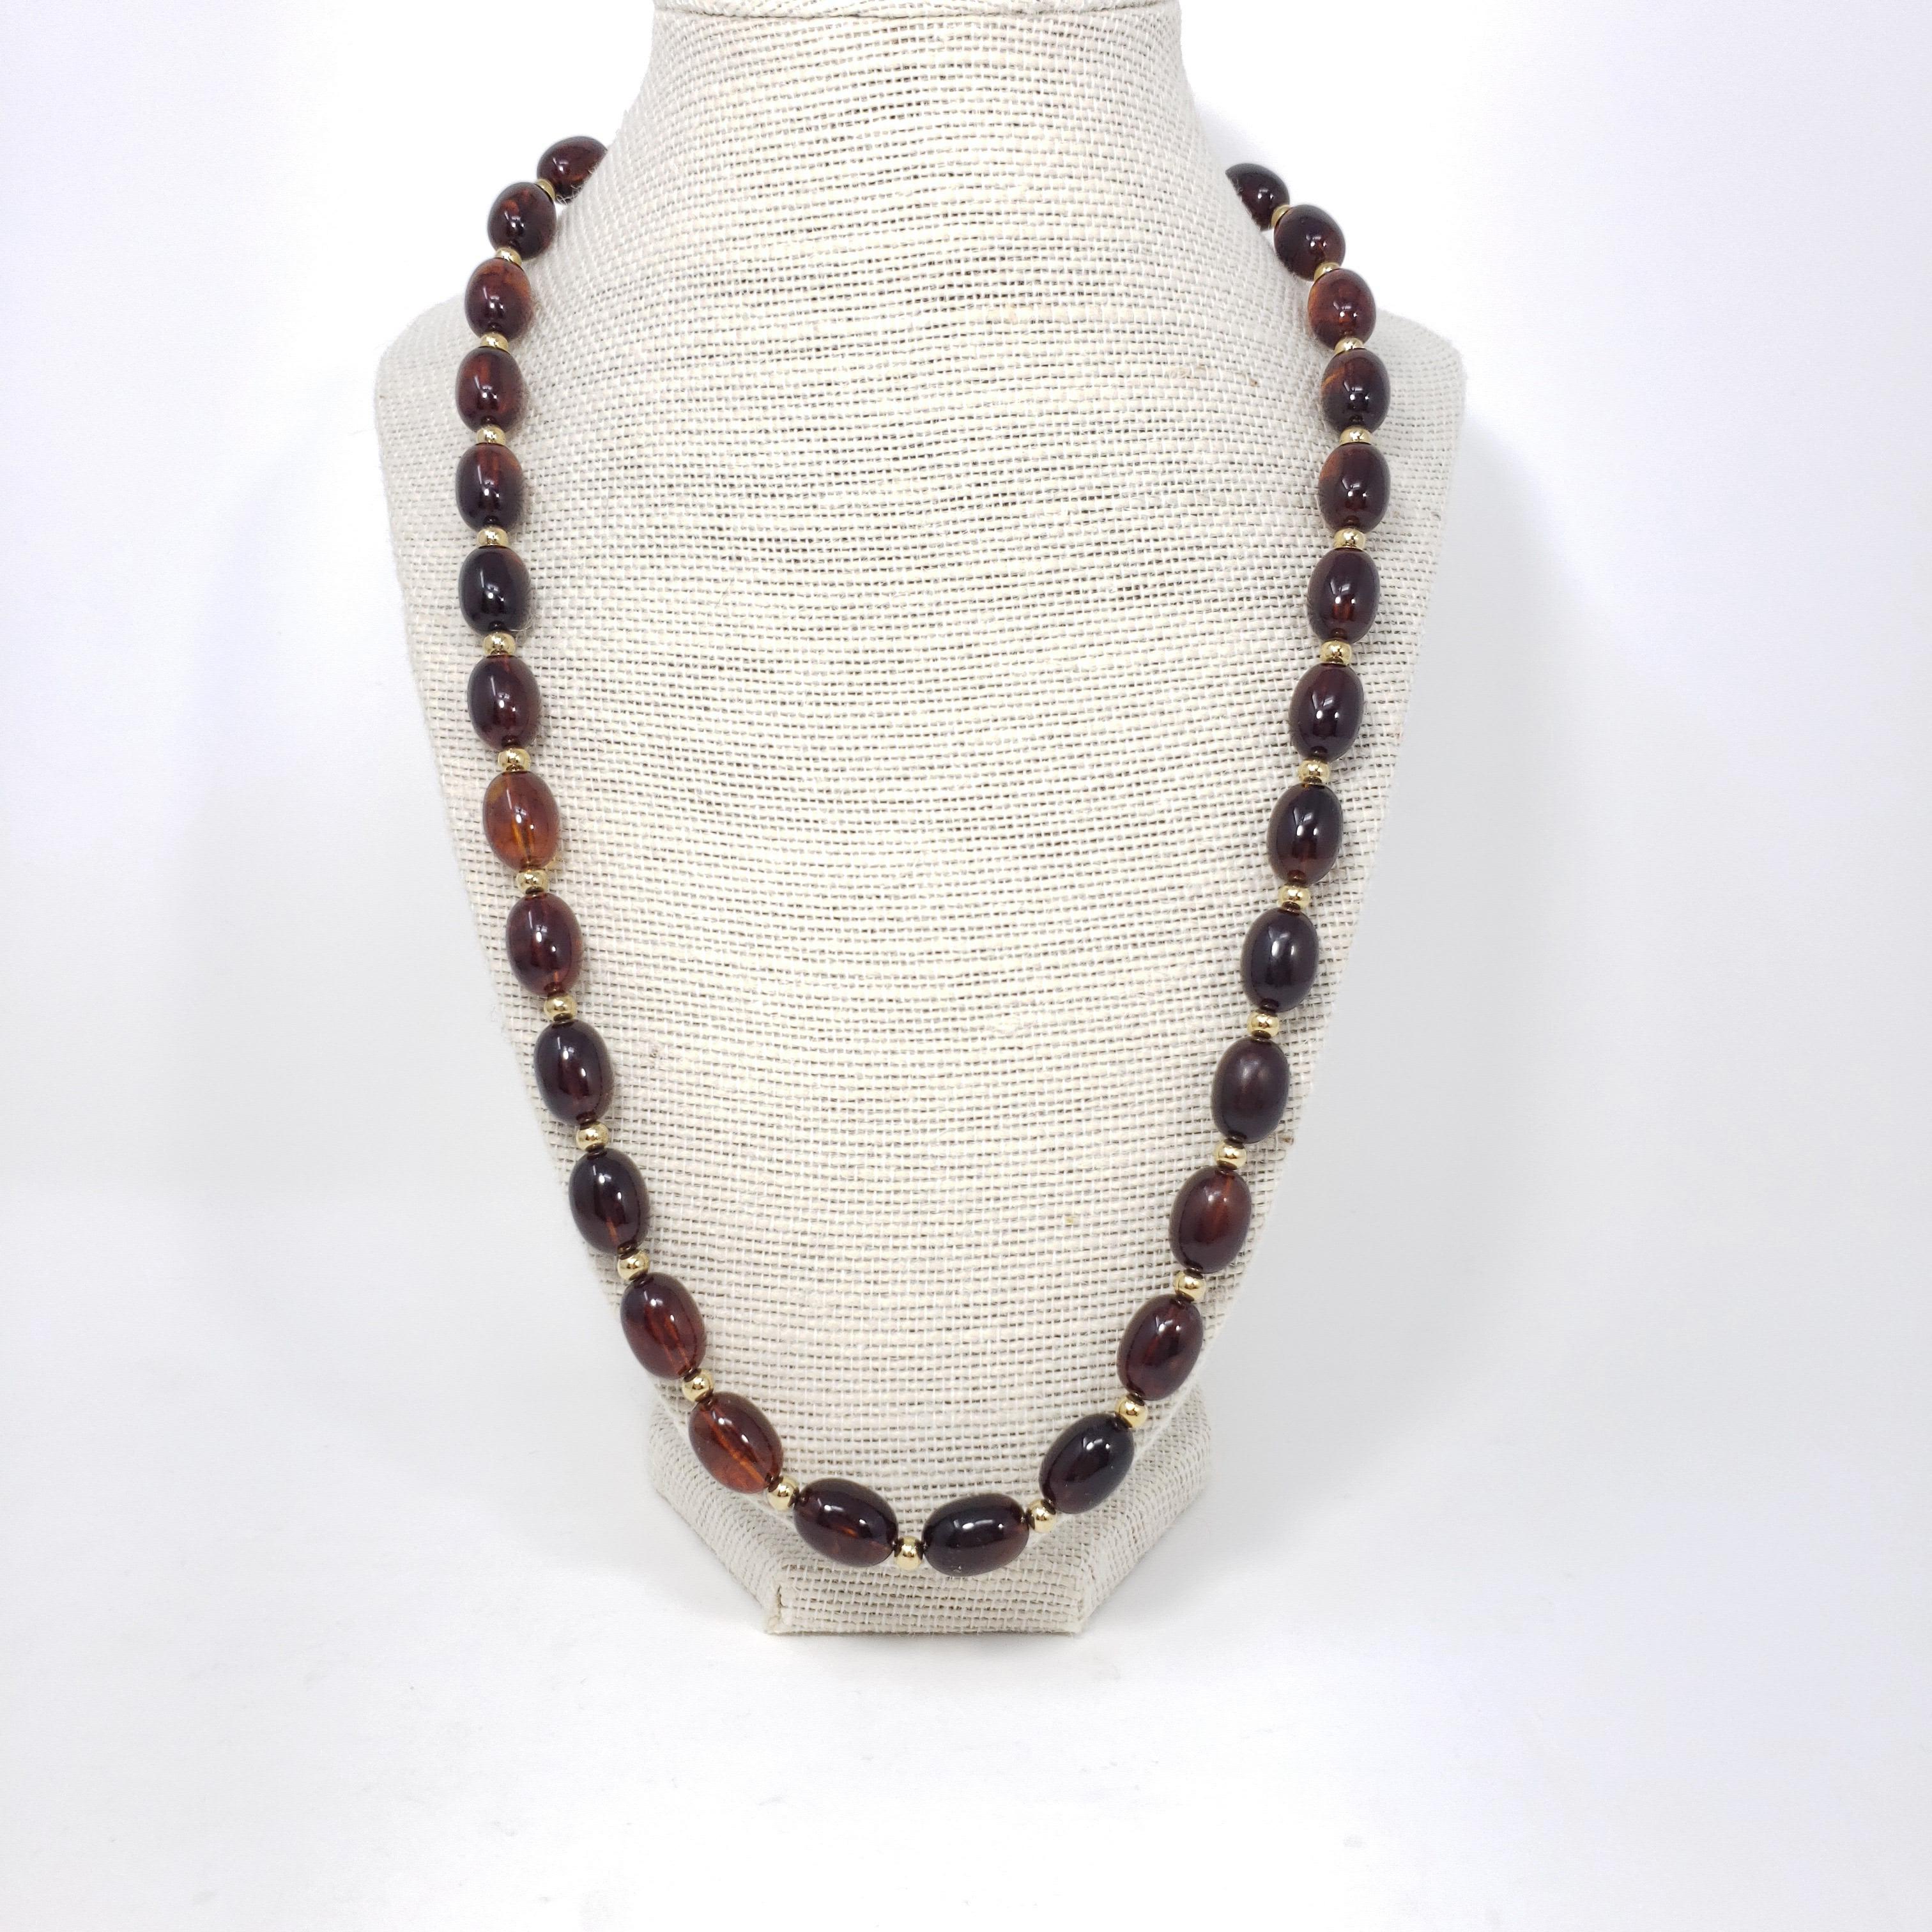 A retro necklace featuring amber-colored lucite beads with gold-tone accents. A perfect touch of vintage flair!